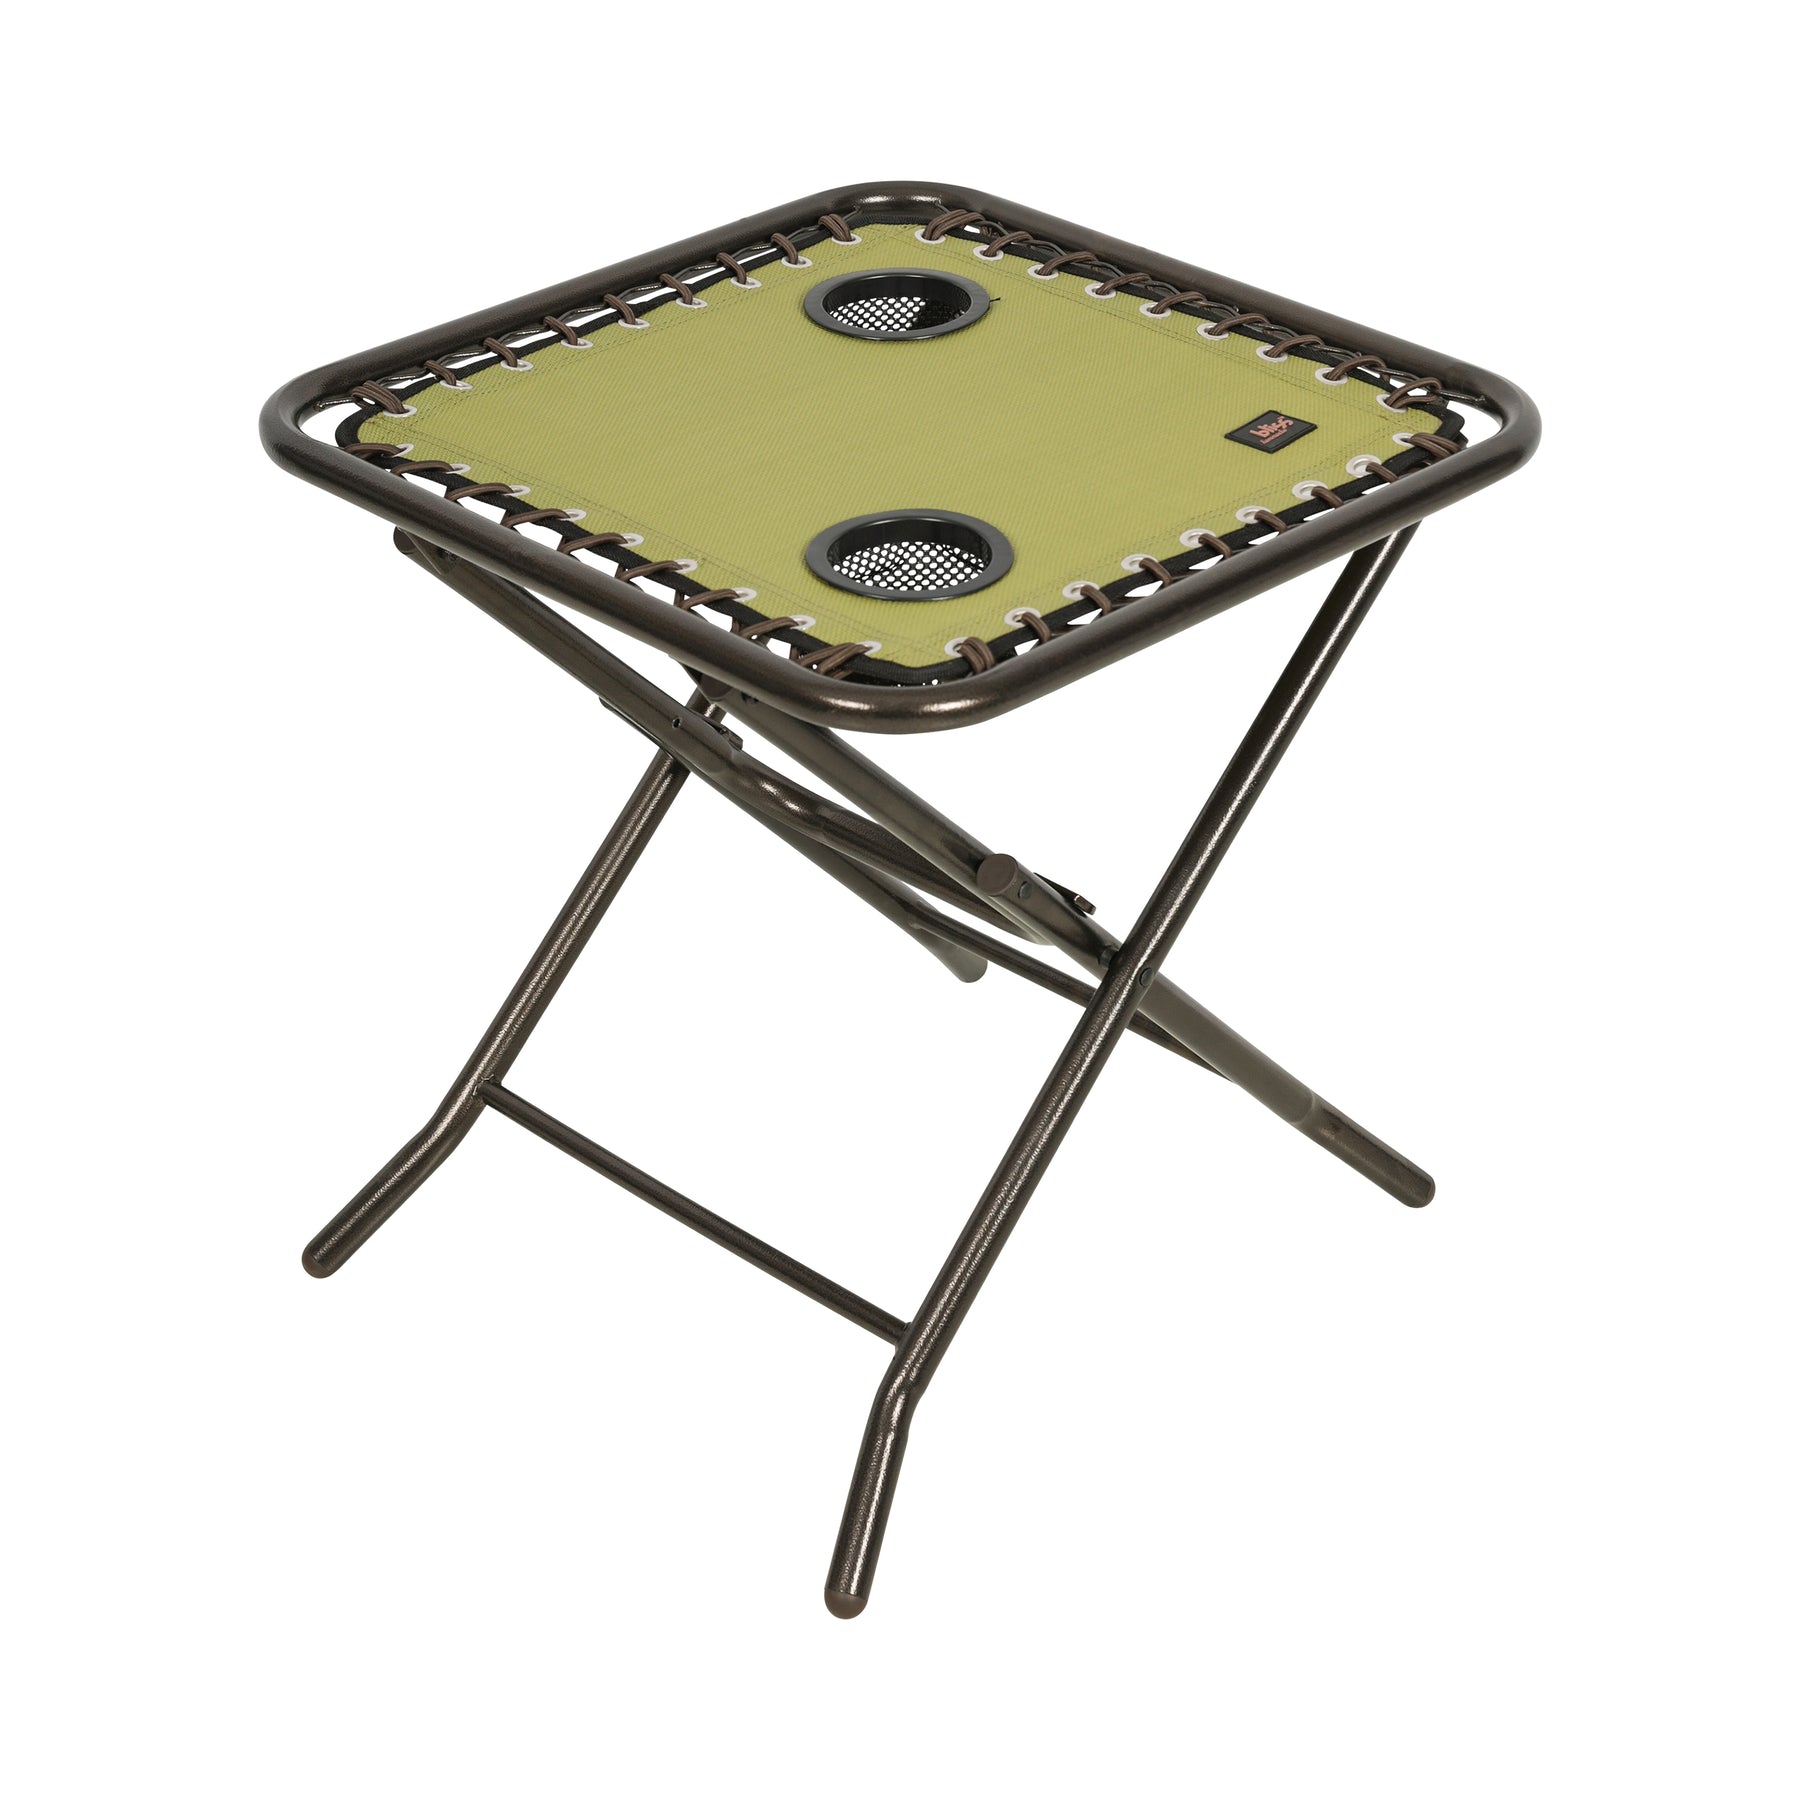 Bliss Hammocks 20-inch Folding Side Table with 2 Built-In Cup Holders in the sage green variation.